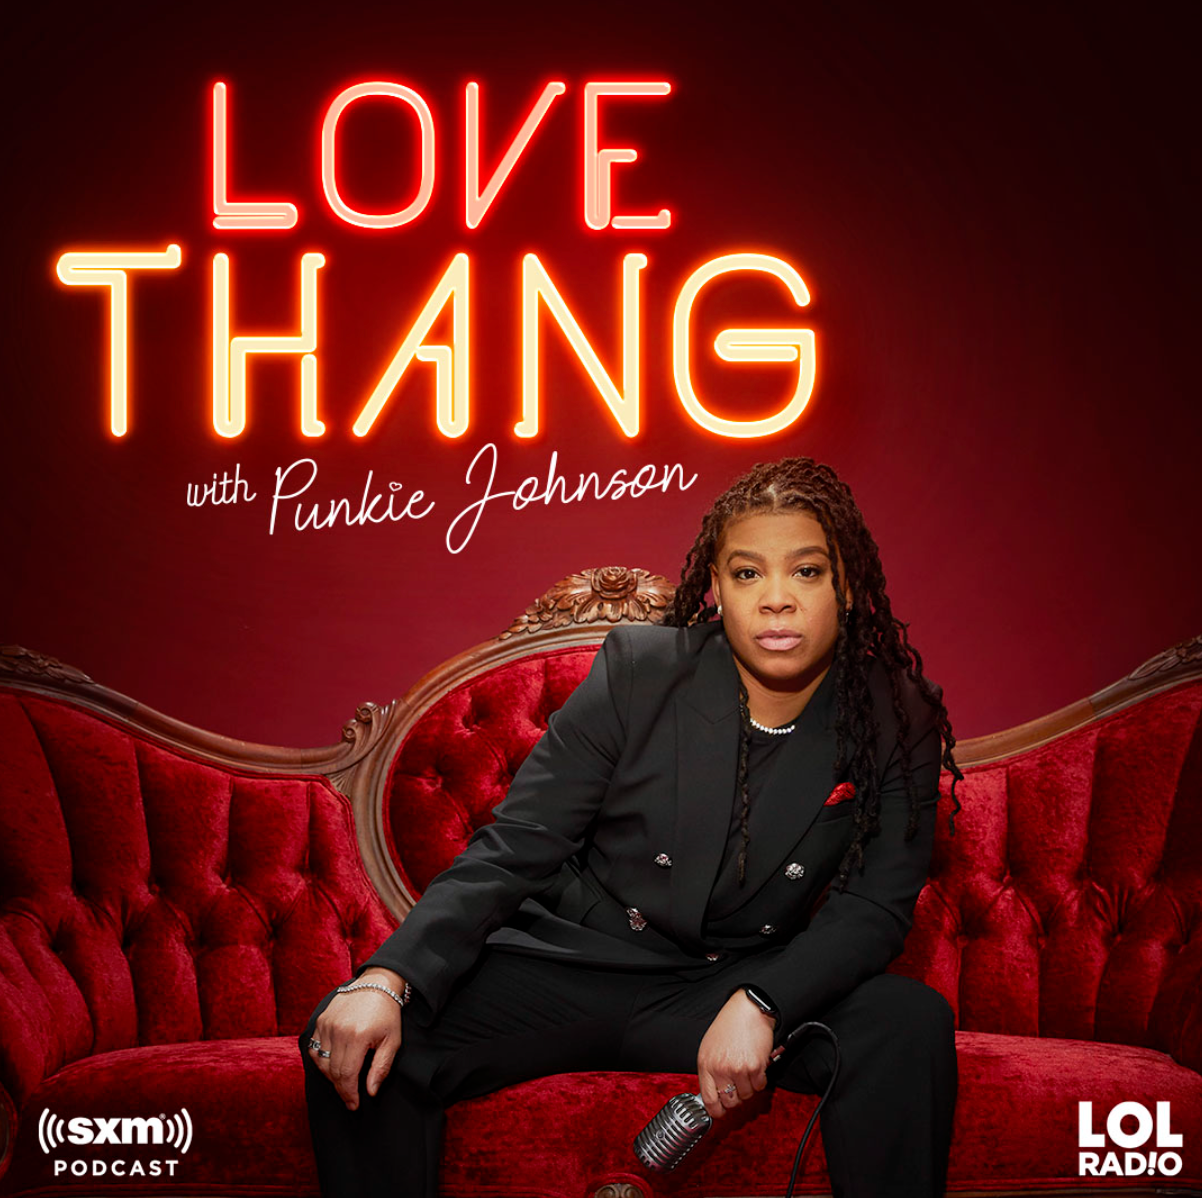  ‘Love Thang With Punkie Johnson’ To Debut On Kevin Hart’s SiriusXM Laugh Out Loud Radio